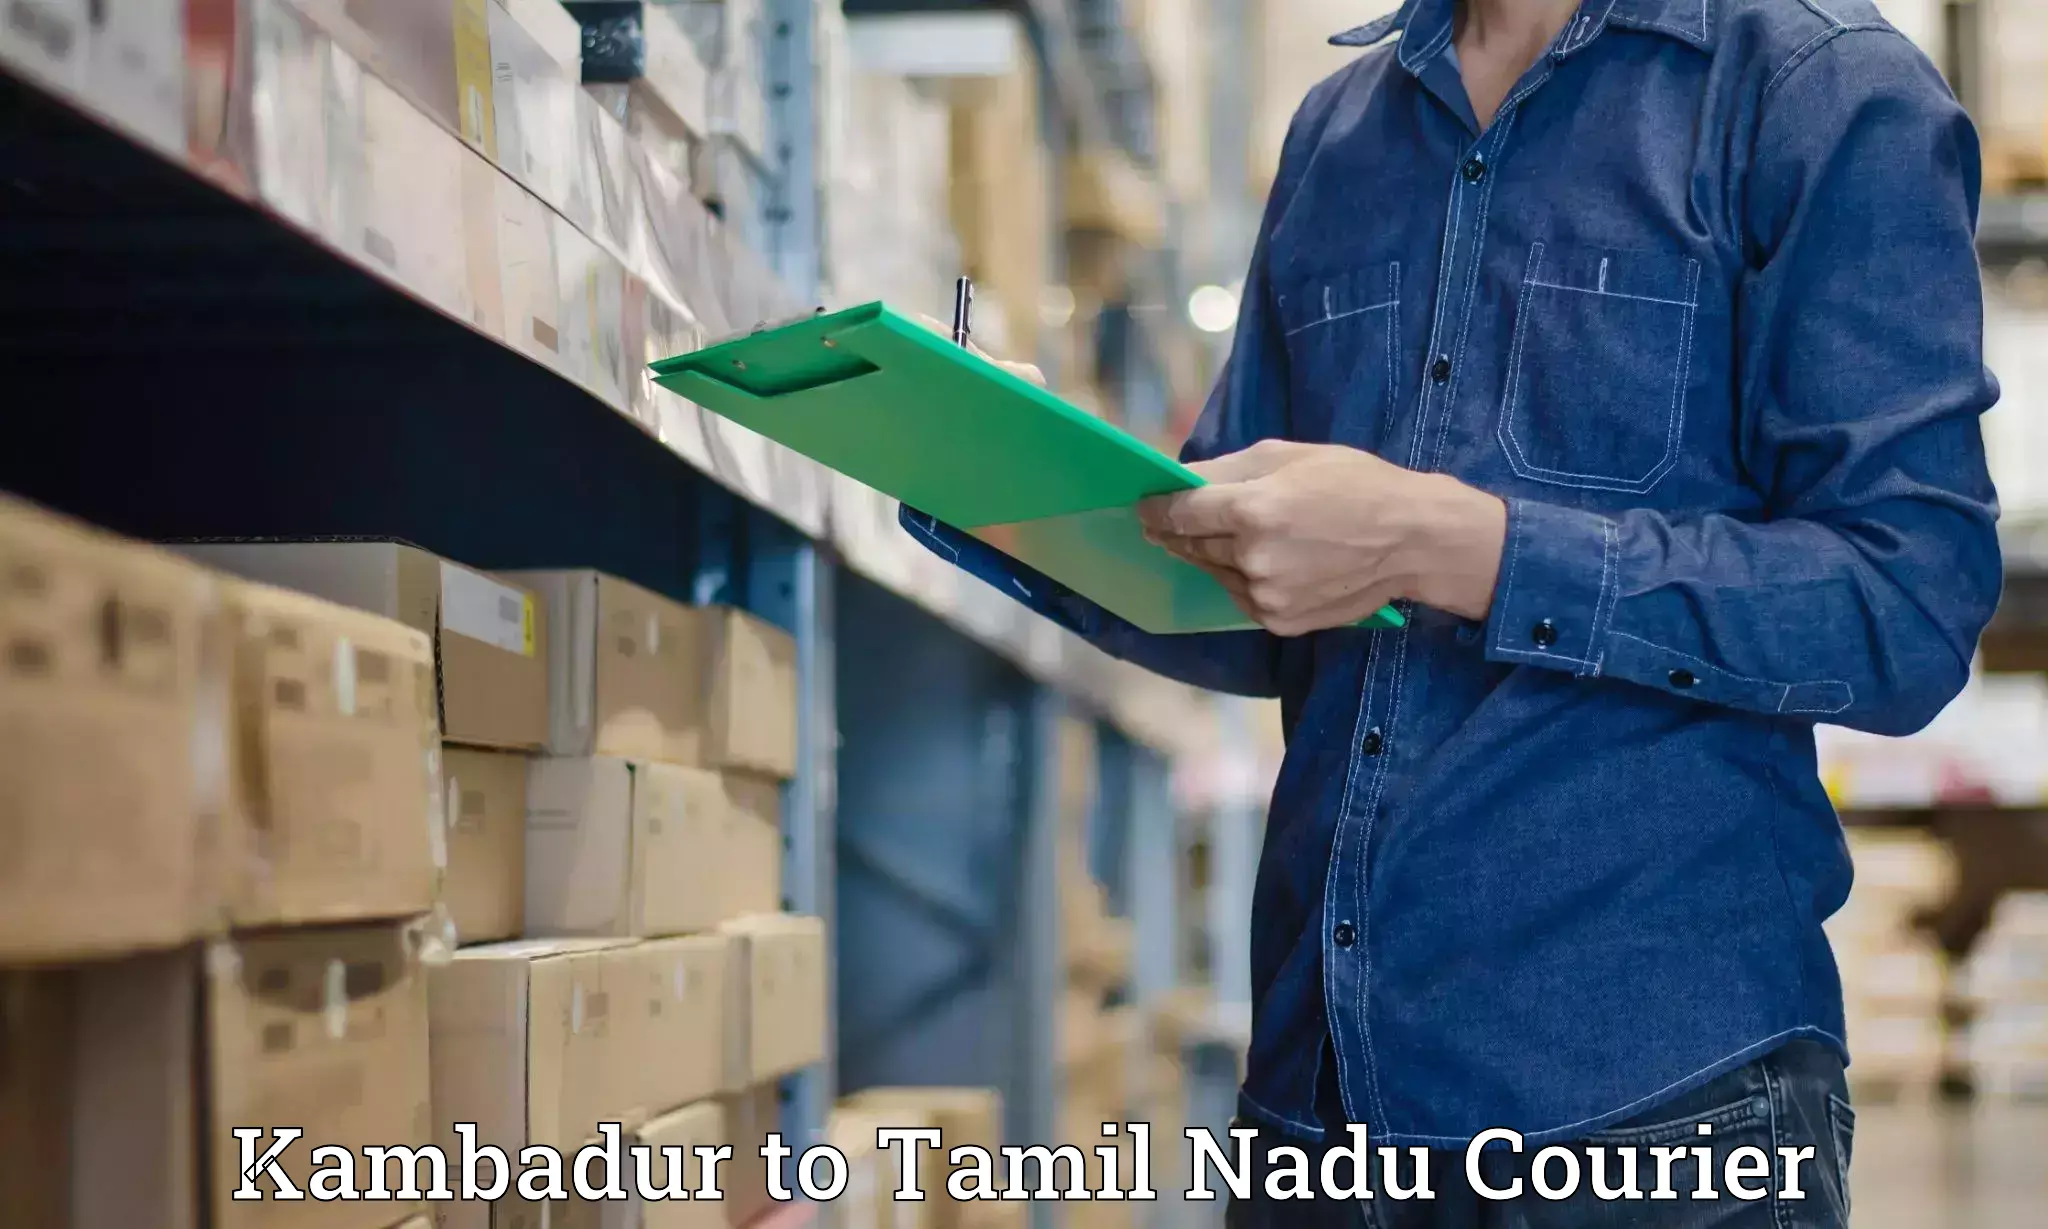 Reliable delivery network Kambadur to Tuticorin Port